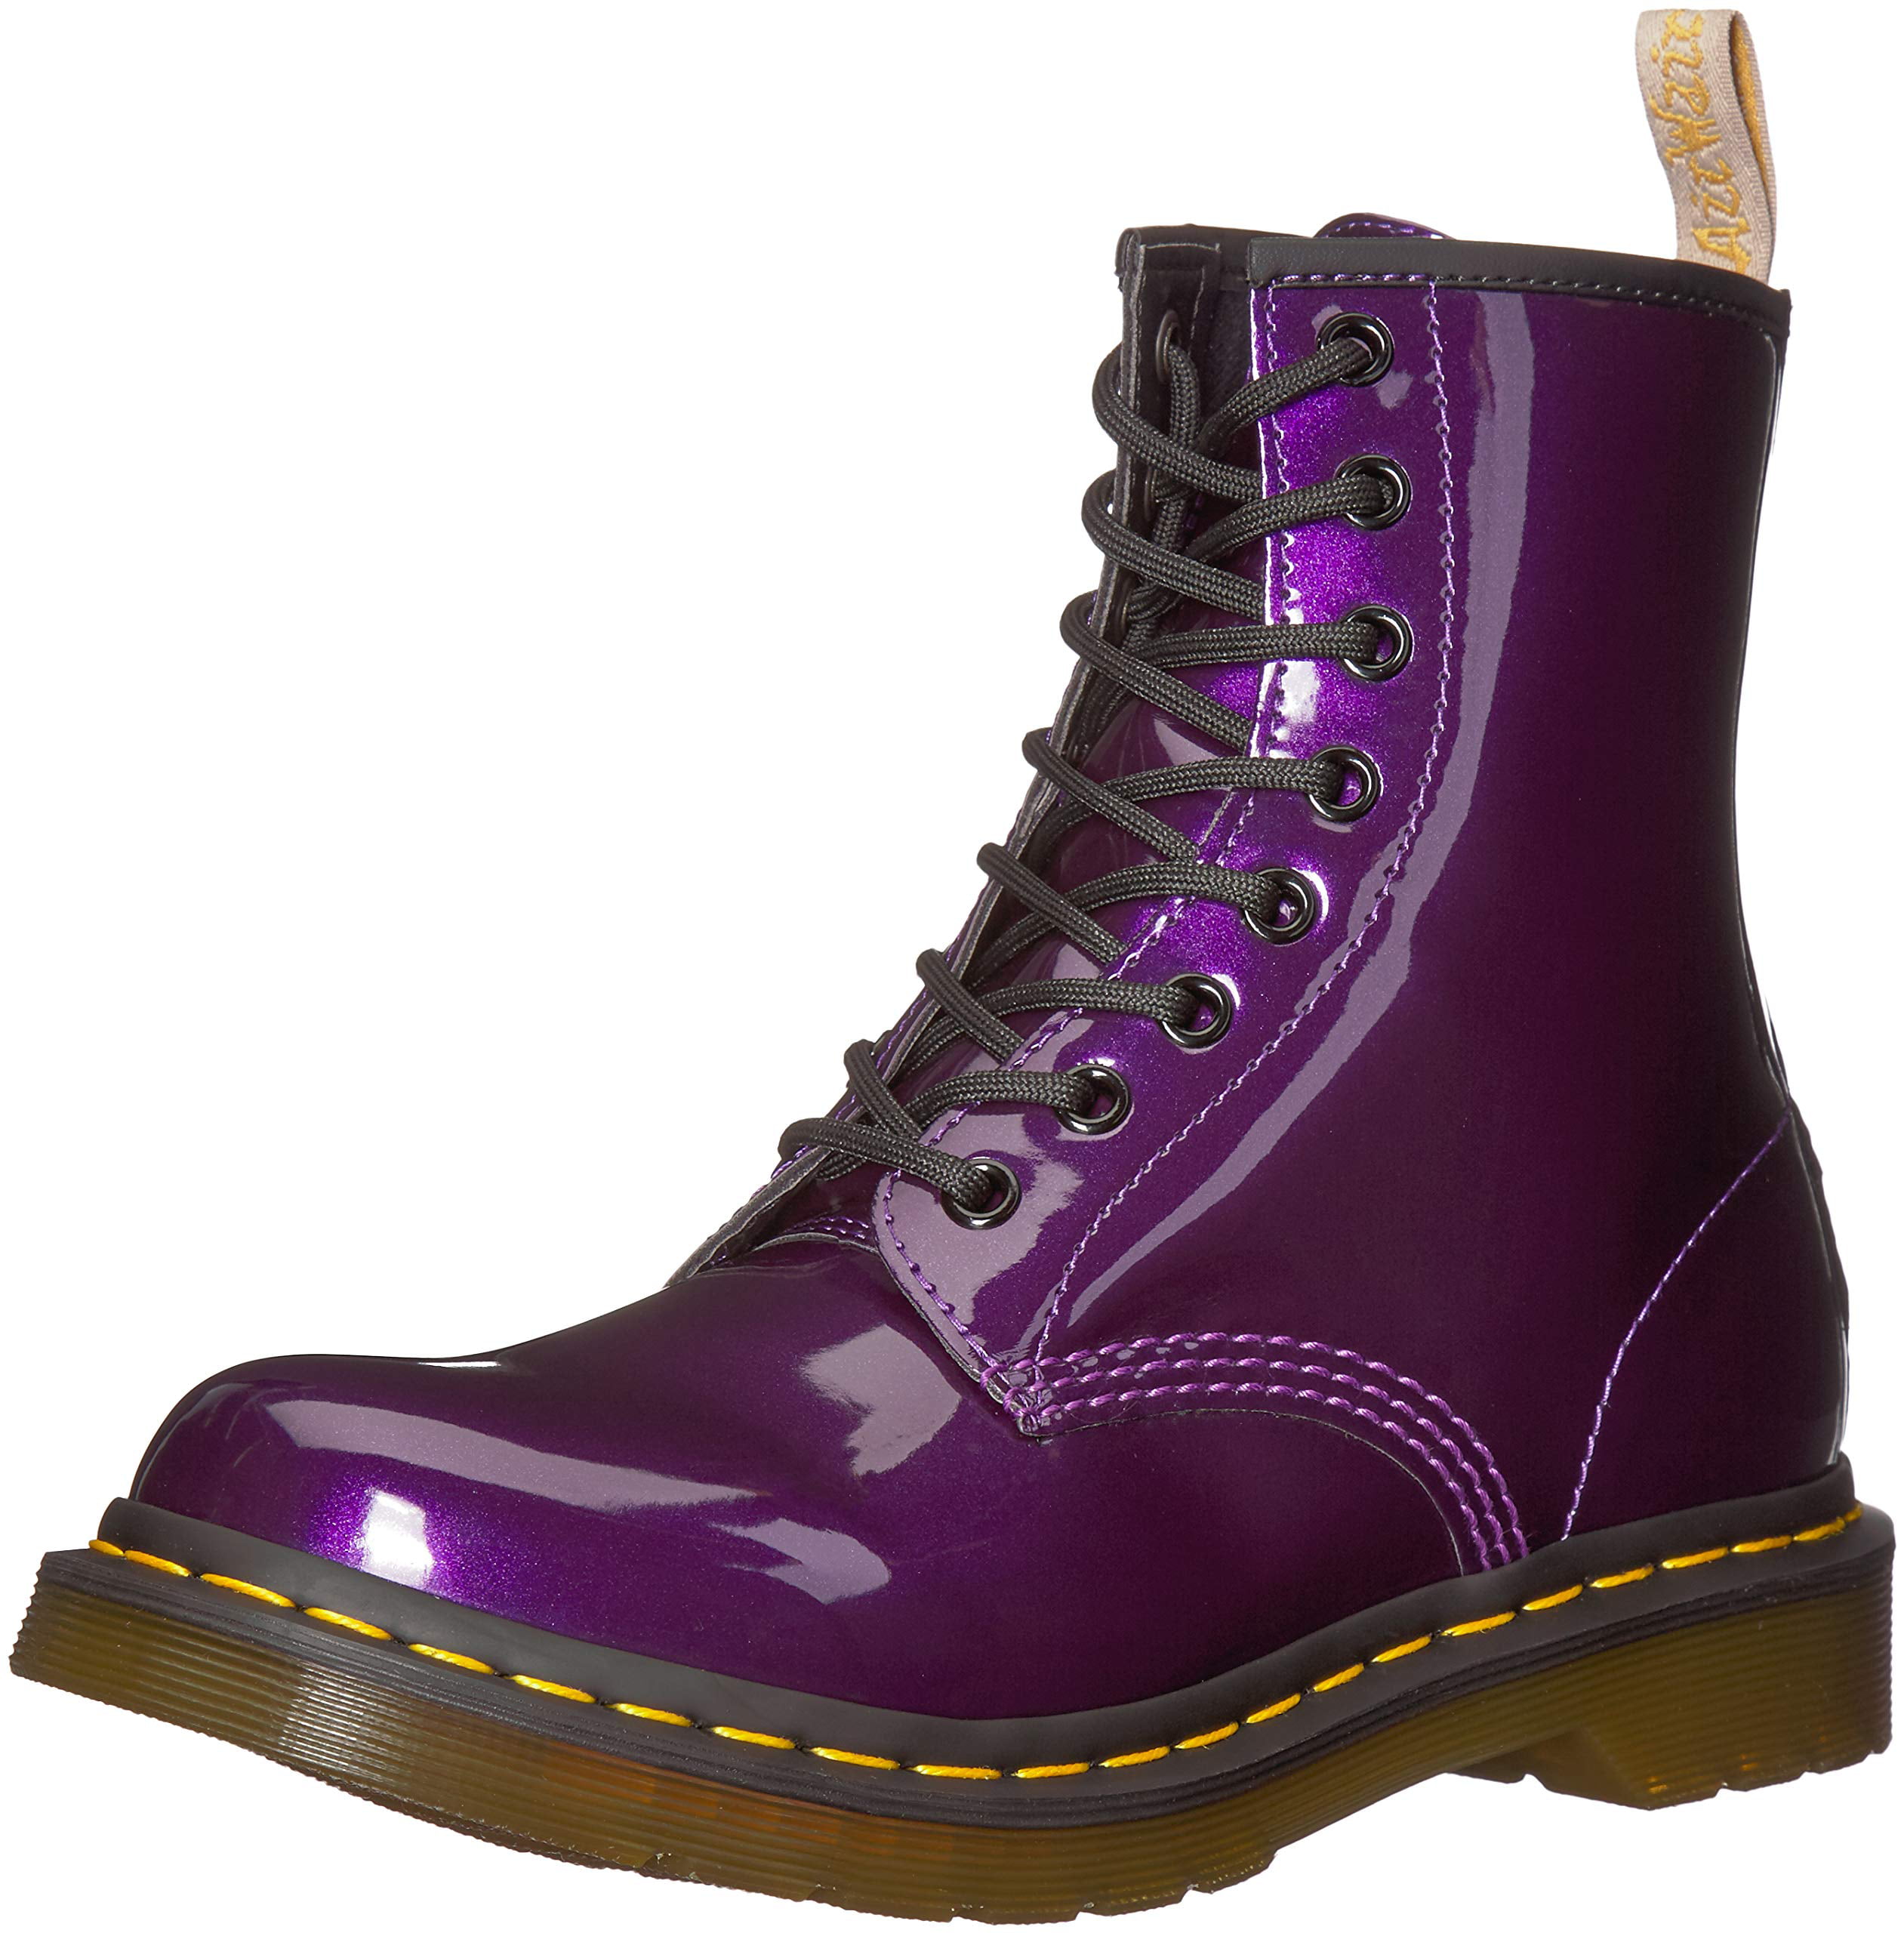 Quality 2 Pairs Of Dolls Purple DM Style Boots shoes made For dolls UK Seller